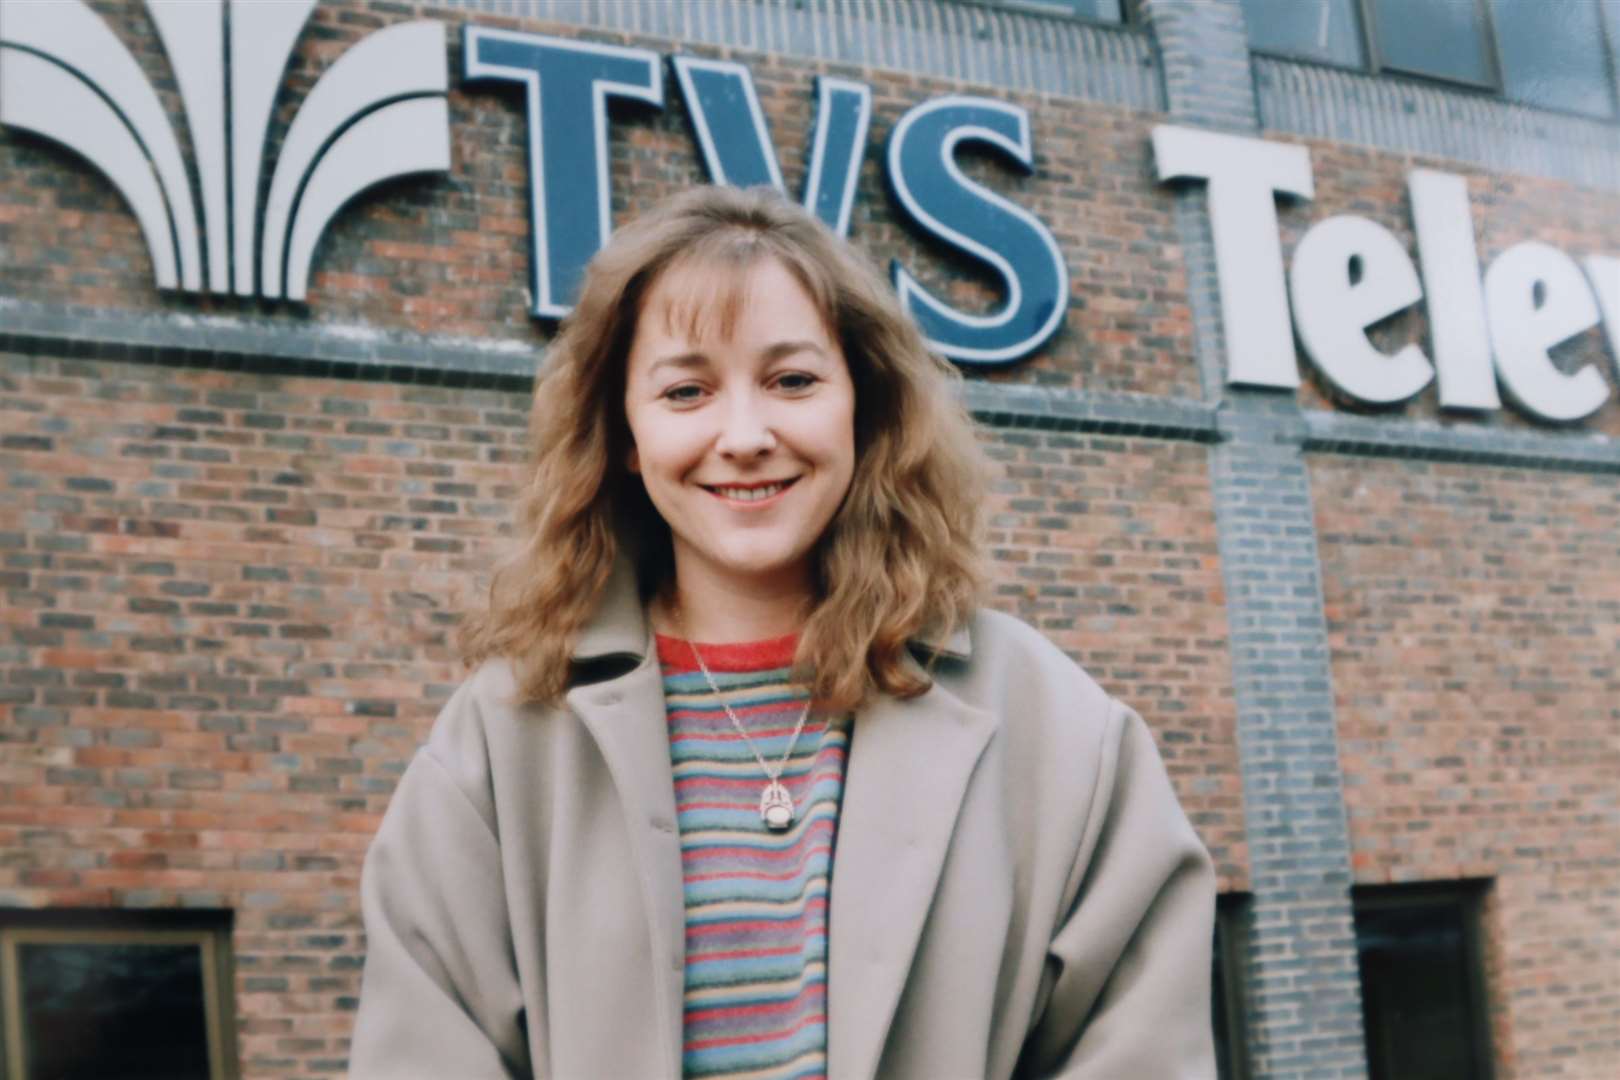 Producer Vanessa Hill outside the TVS studios at Maidstone